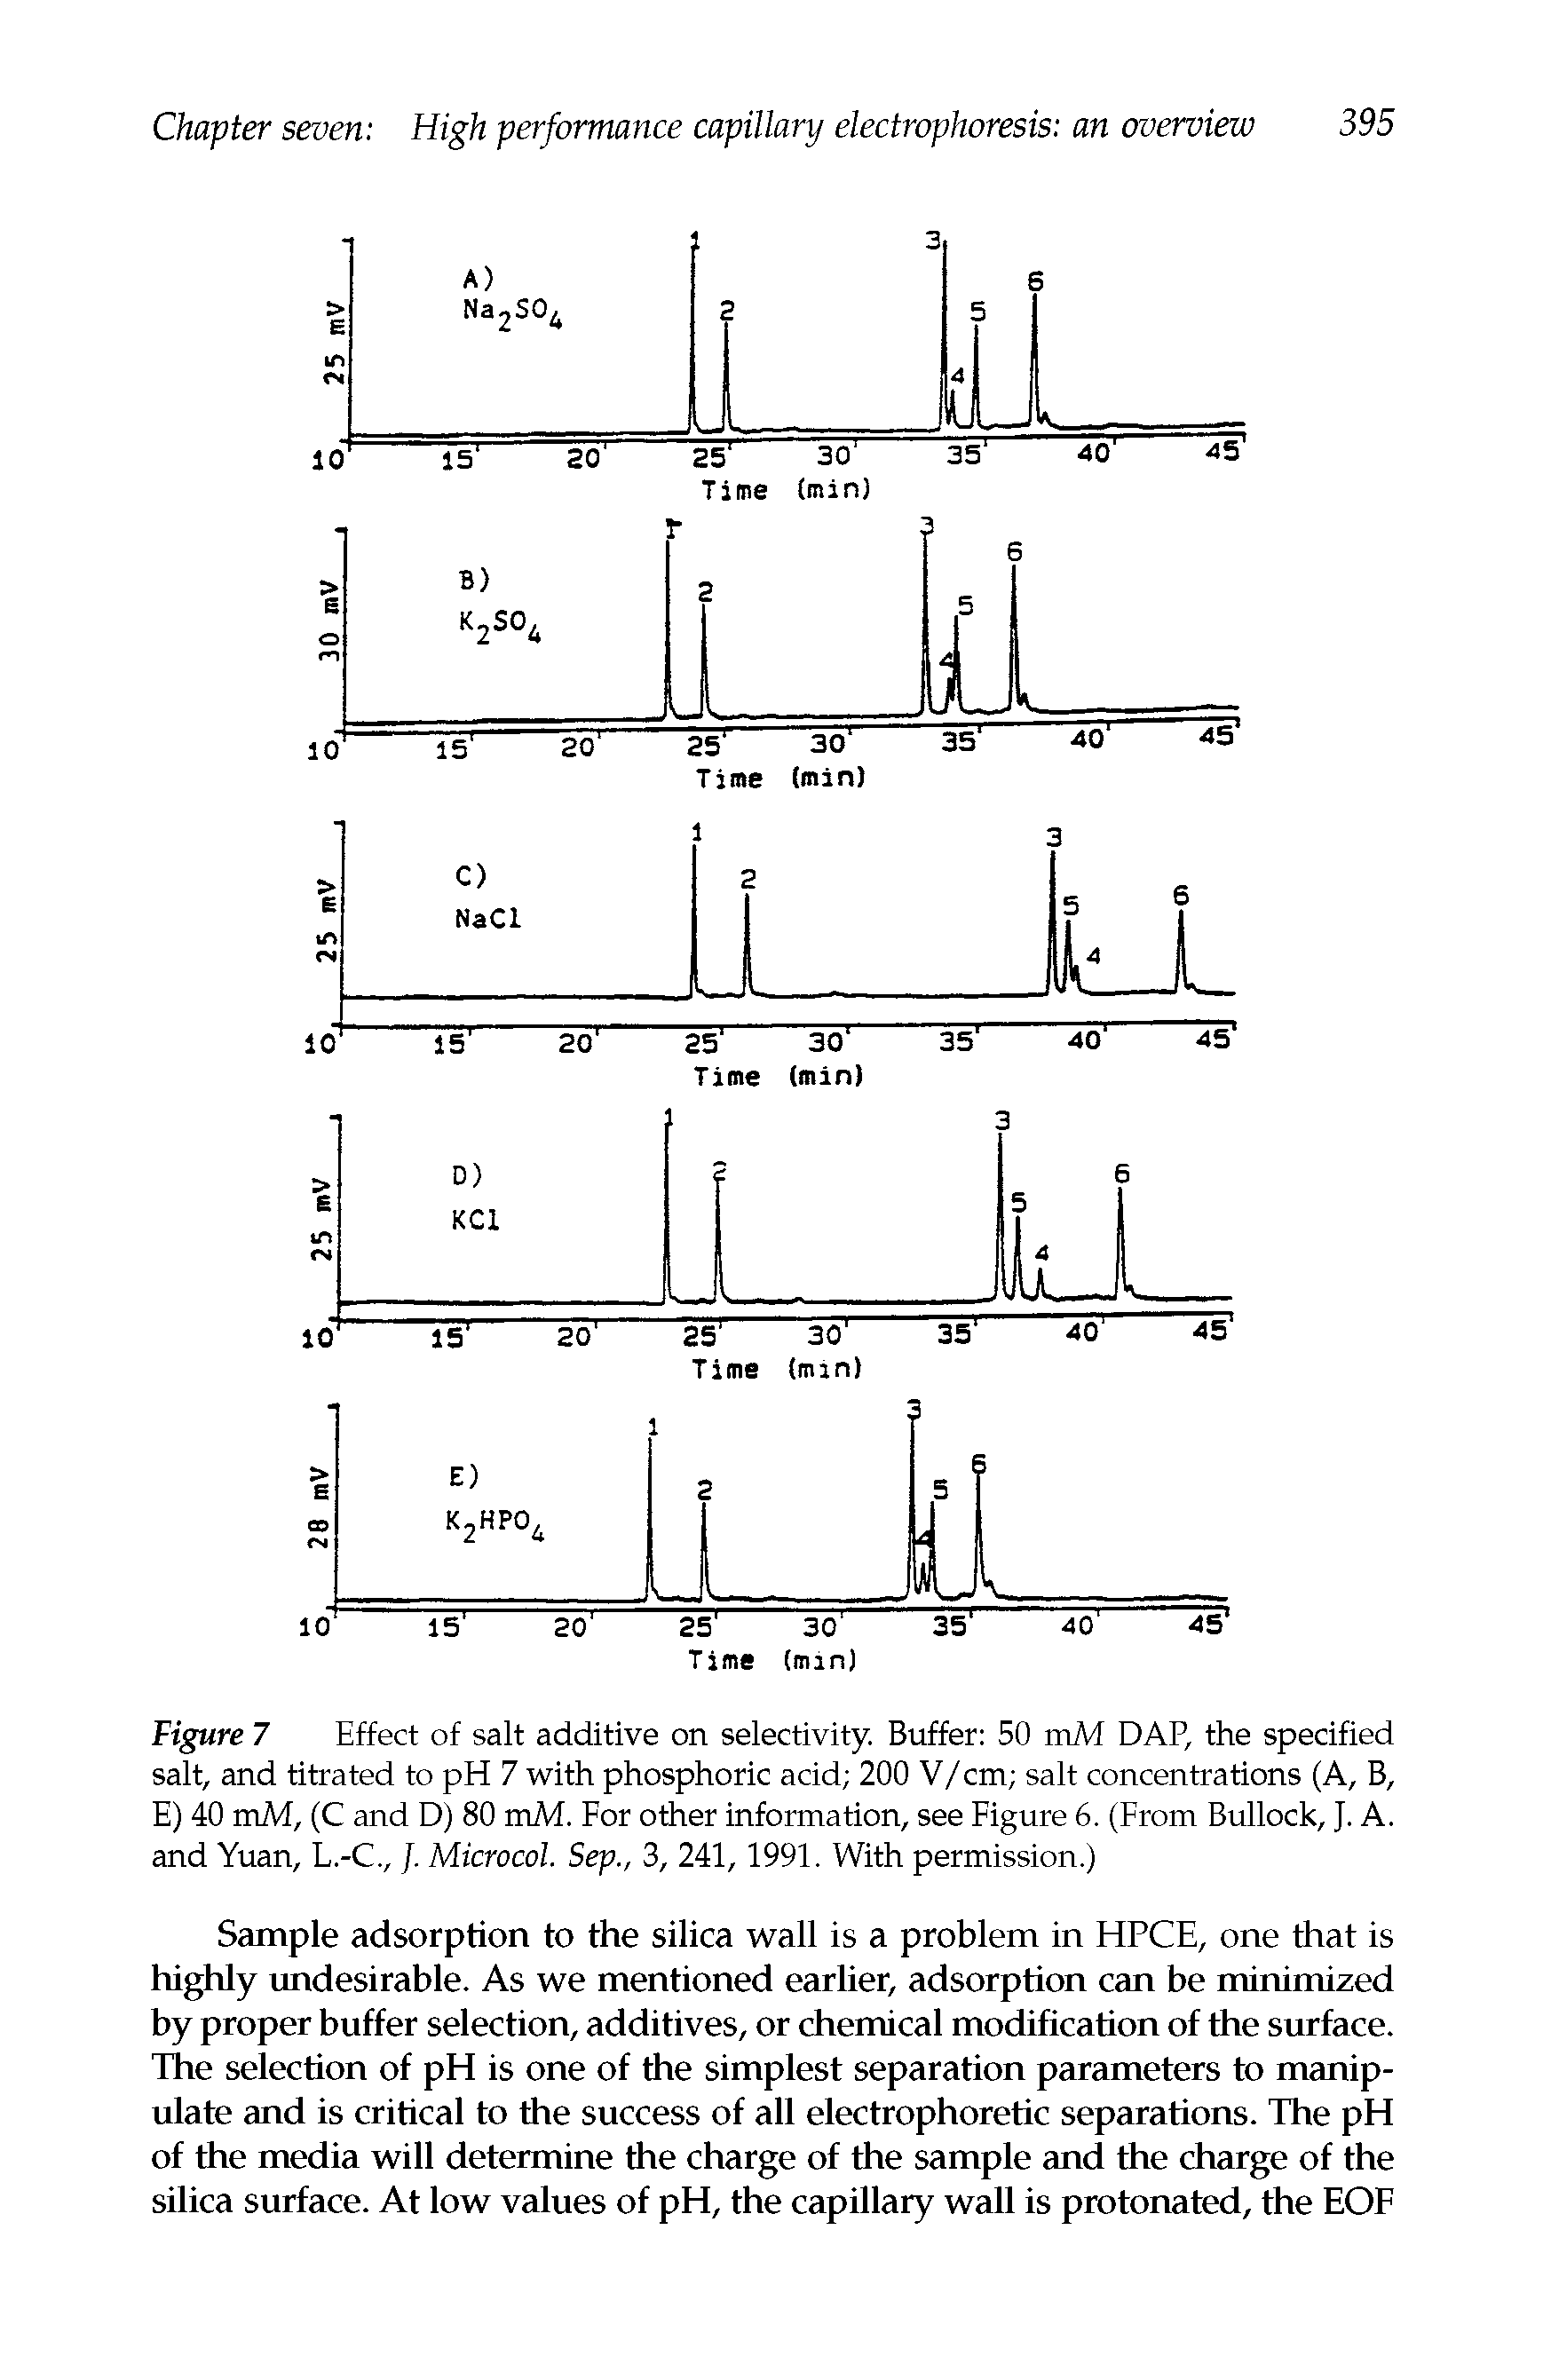 Figure 7 Effect of salt additive on selectivity. Buffer 50 mM DAP, the specified salt, and titrated to pH 7 with phosphoric acid 200 V/cm salt concentrations (A, B, E) 40 mM, (C and D) 80 mM. For other information, see Figure 6. (From Bullock, J. A. and Yuan, L.-C., /. Microcol. Sep., 3, 241, 1991. With permission.)...